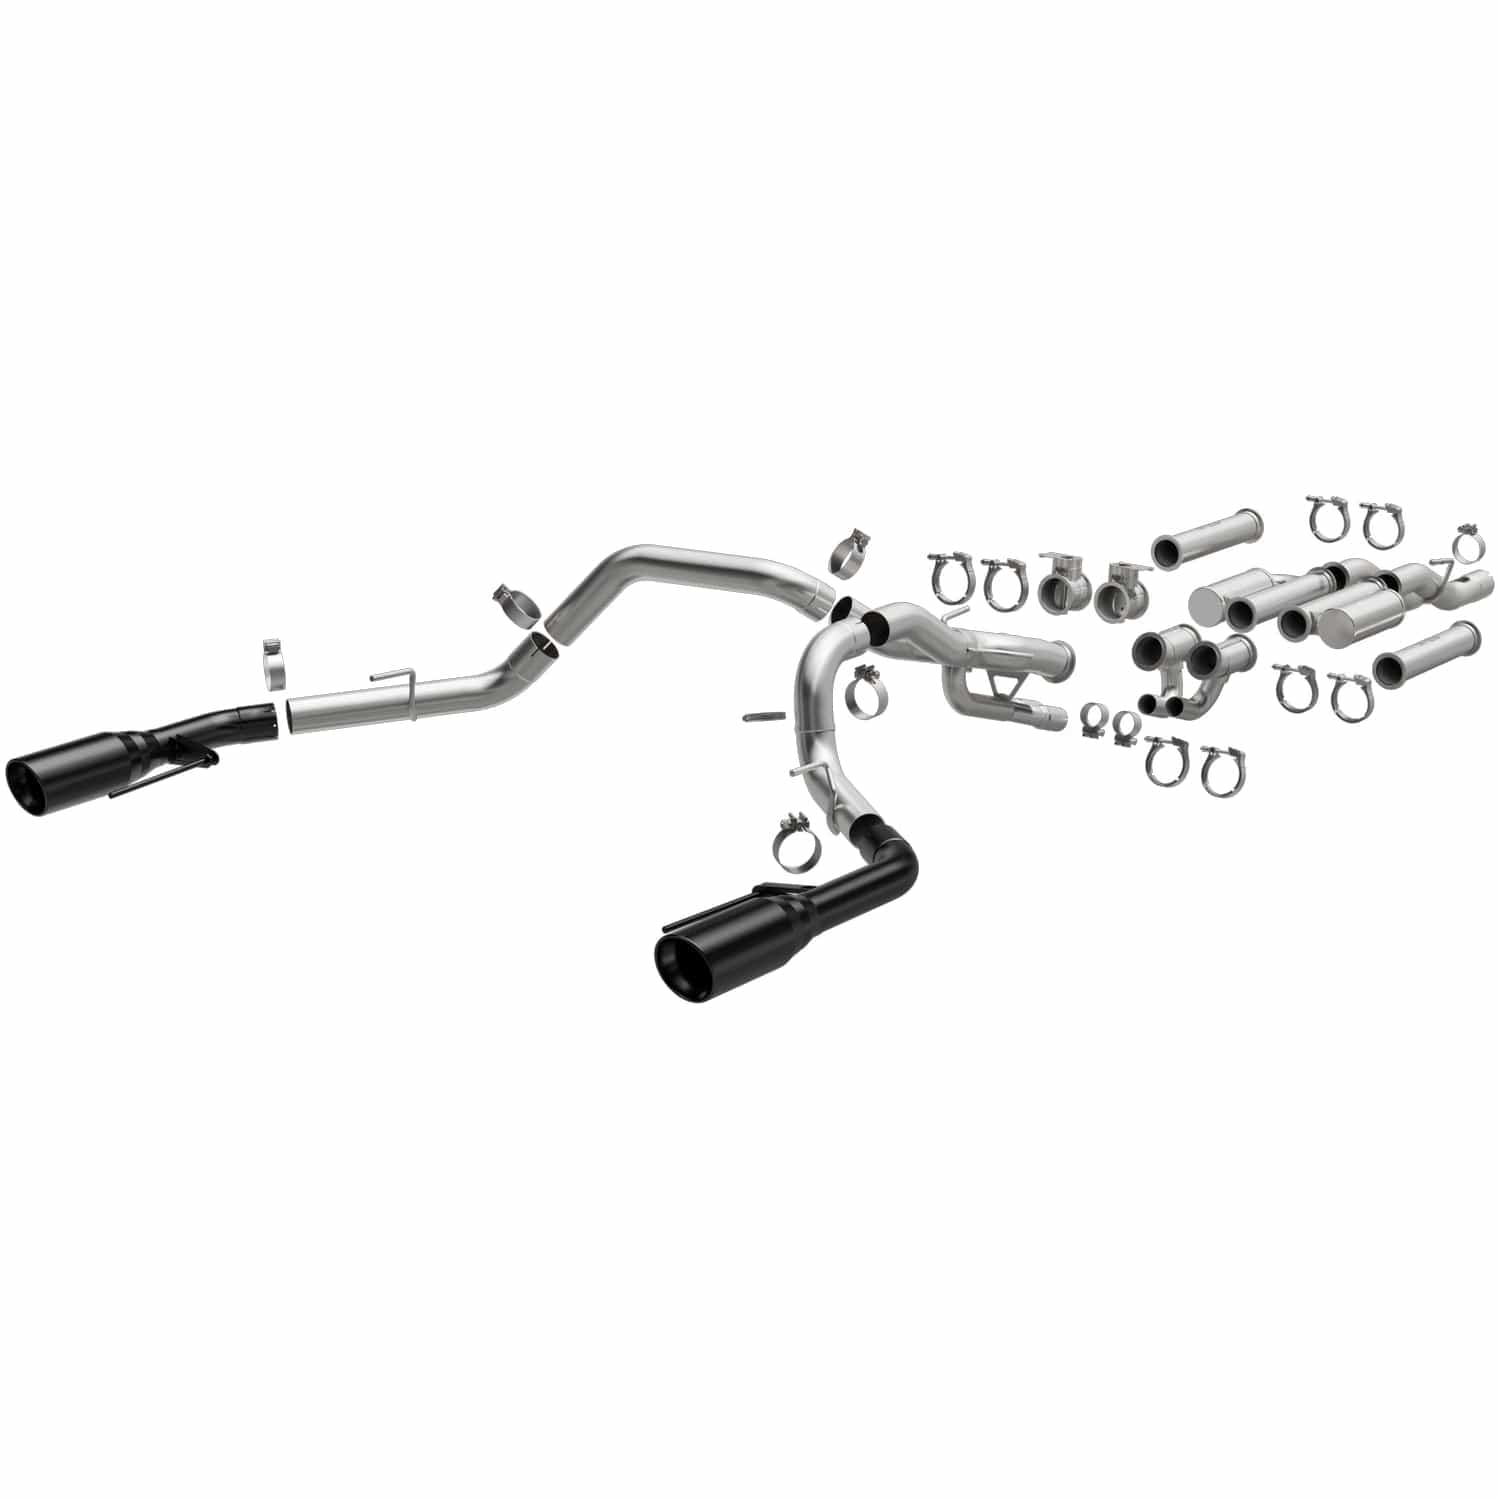 '21-23  Ford Raptor  XMOD Series Cat-Back Performance Exhaust System MagnaFlow parts